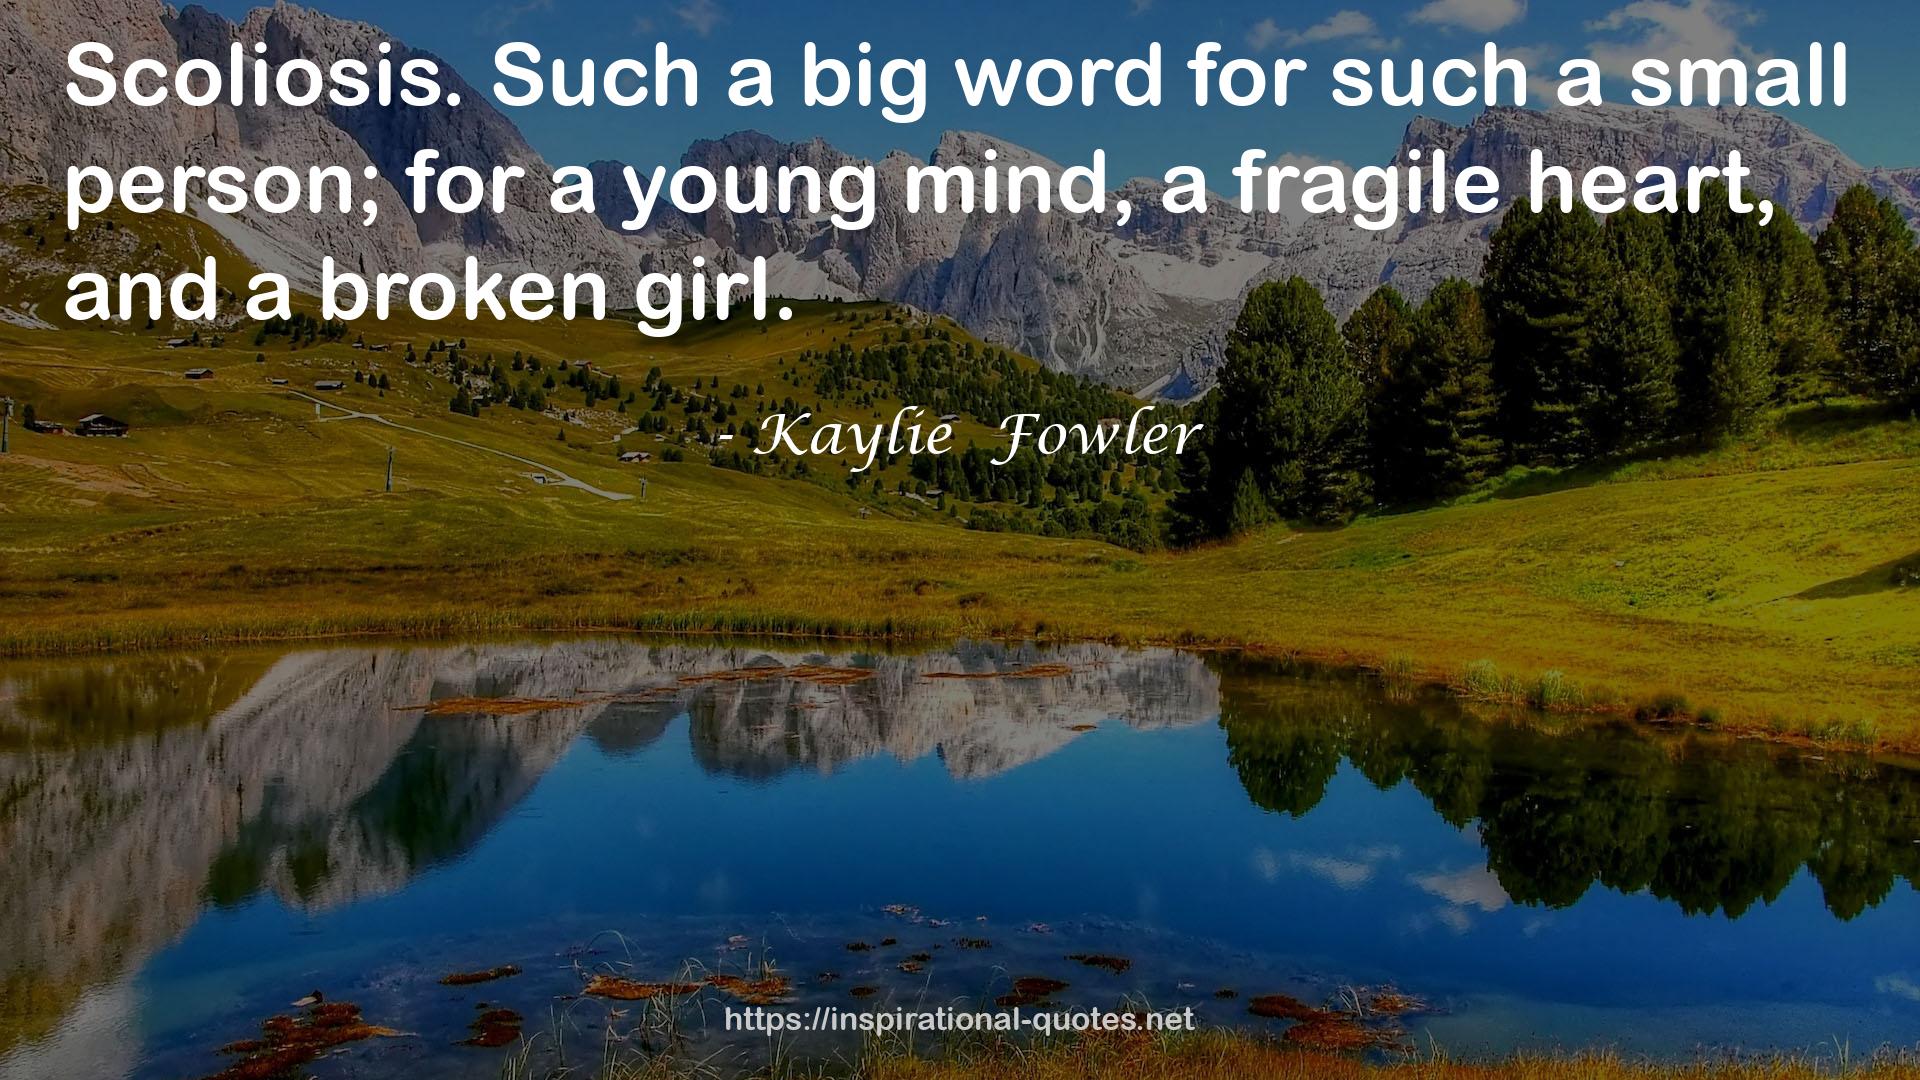 Kaylie  Fowler QUOTES